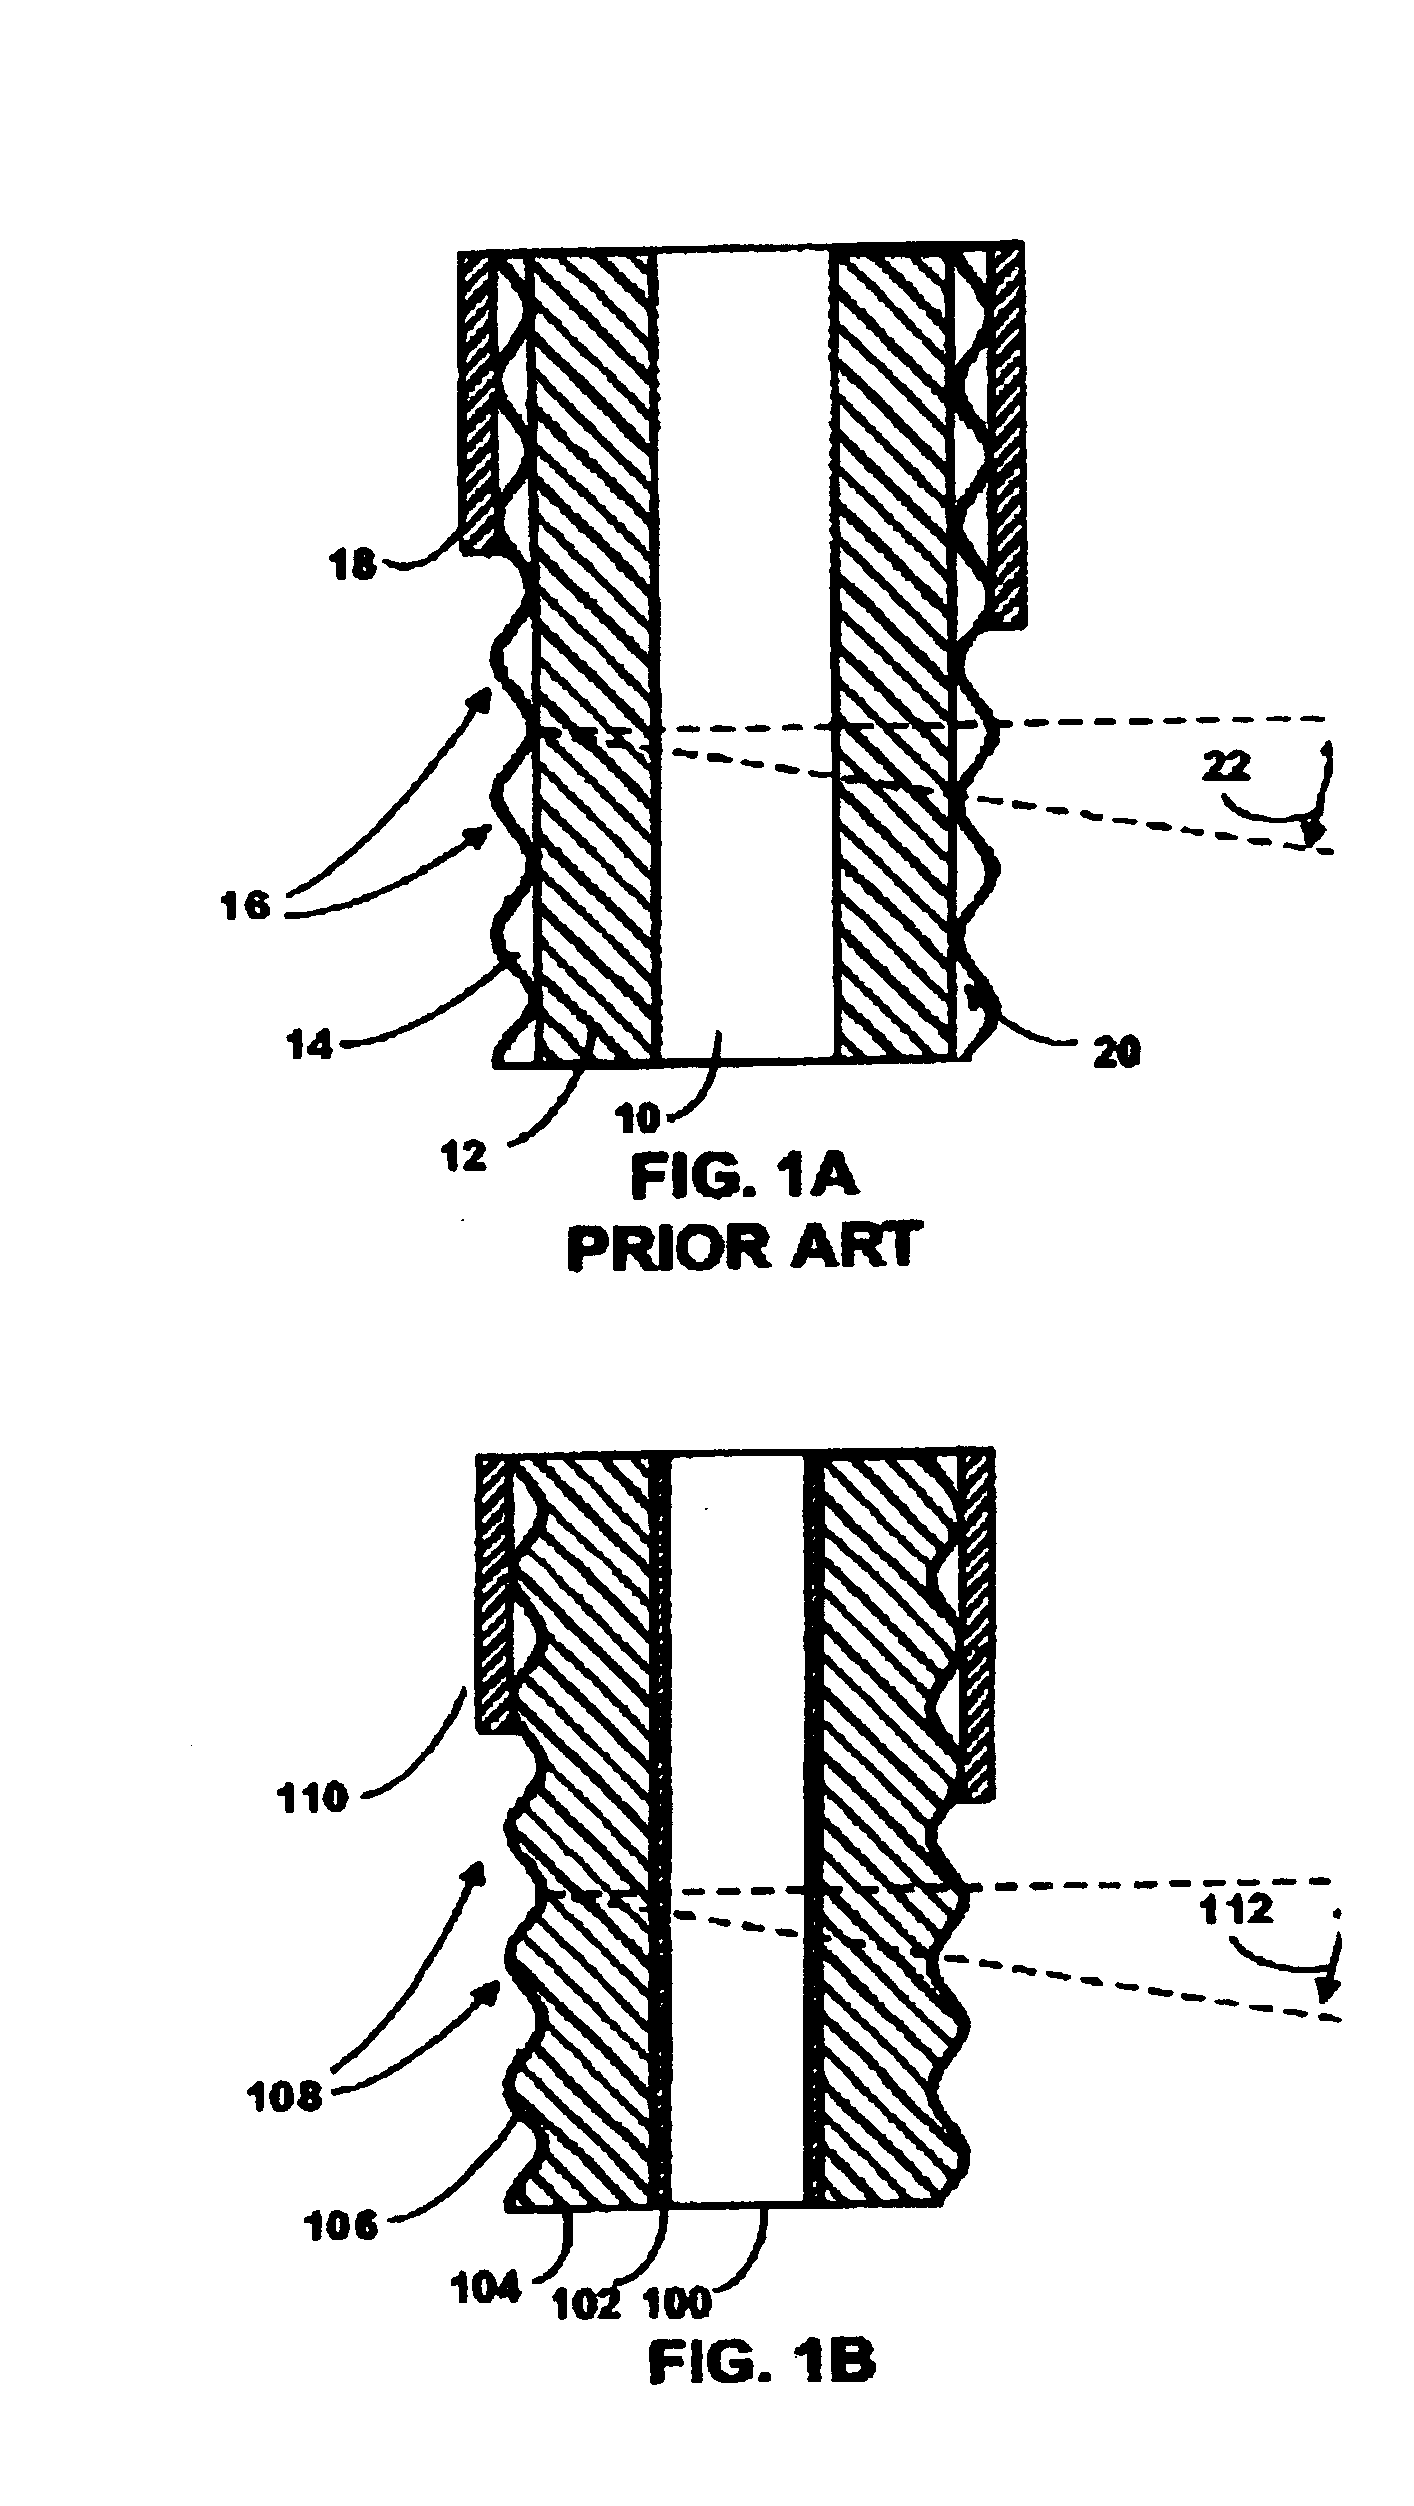 Method of manufacturing a high-performance, water blocking coaxial cable